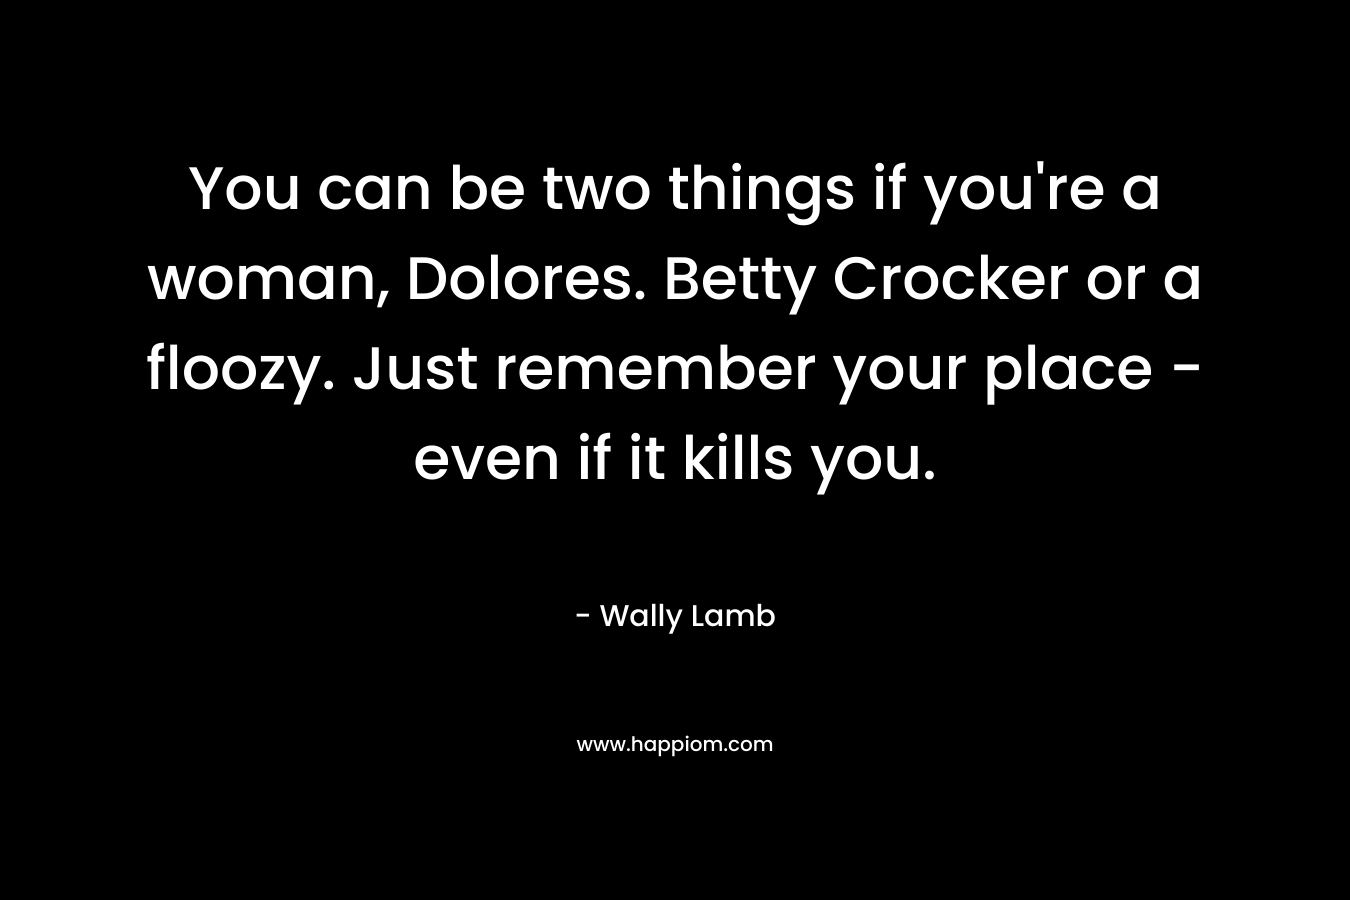 You can be two things if you're a woman, Dolores. Betty Crocker or a floozy. Just remember your place - even if it kills you.